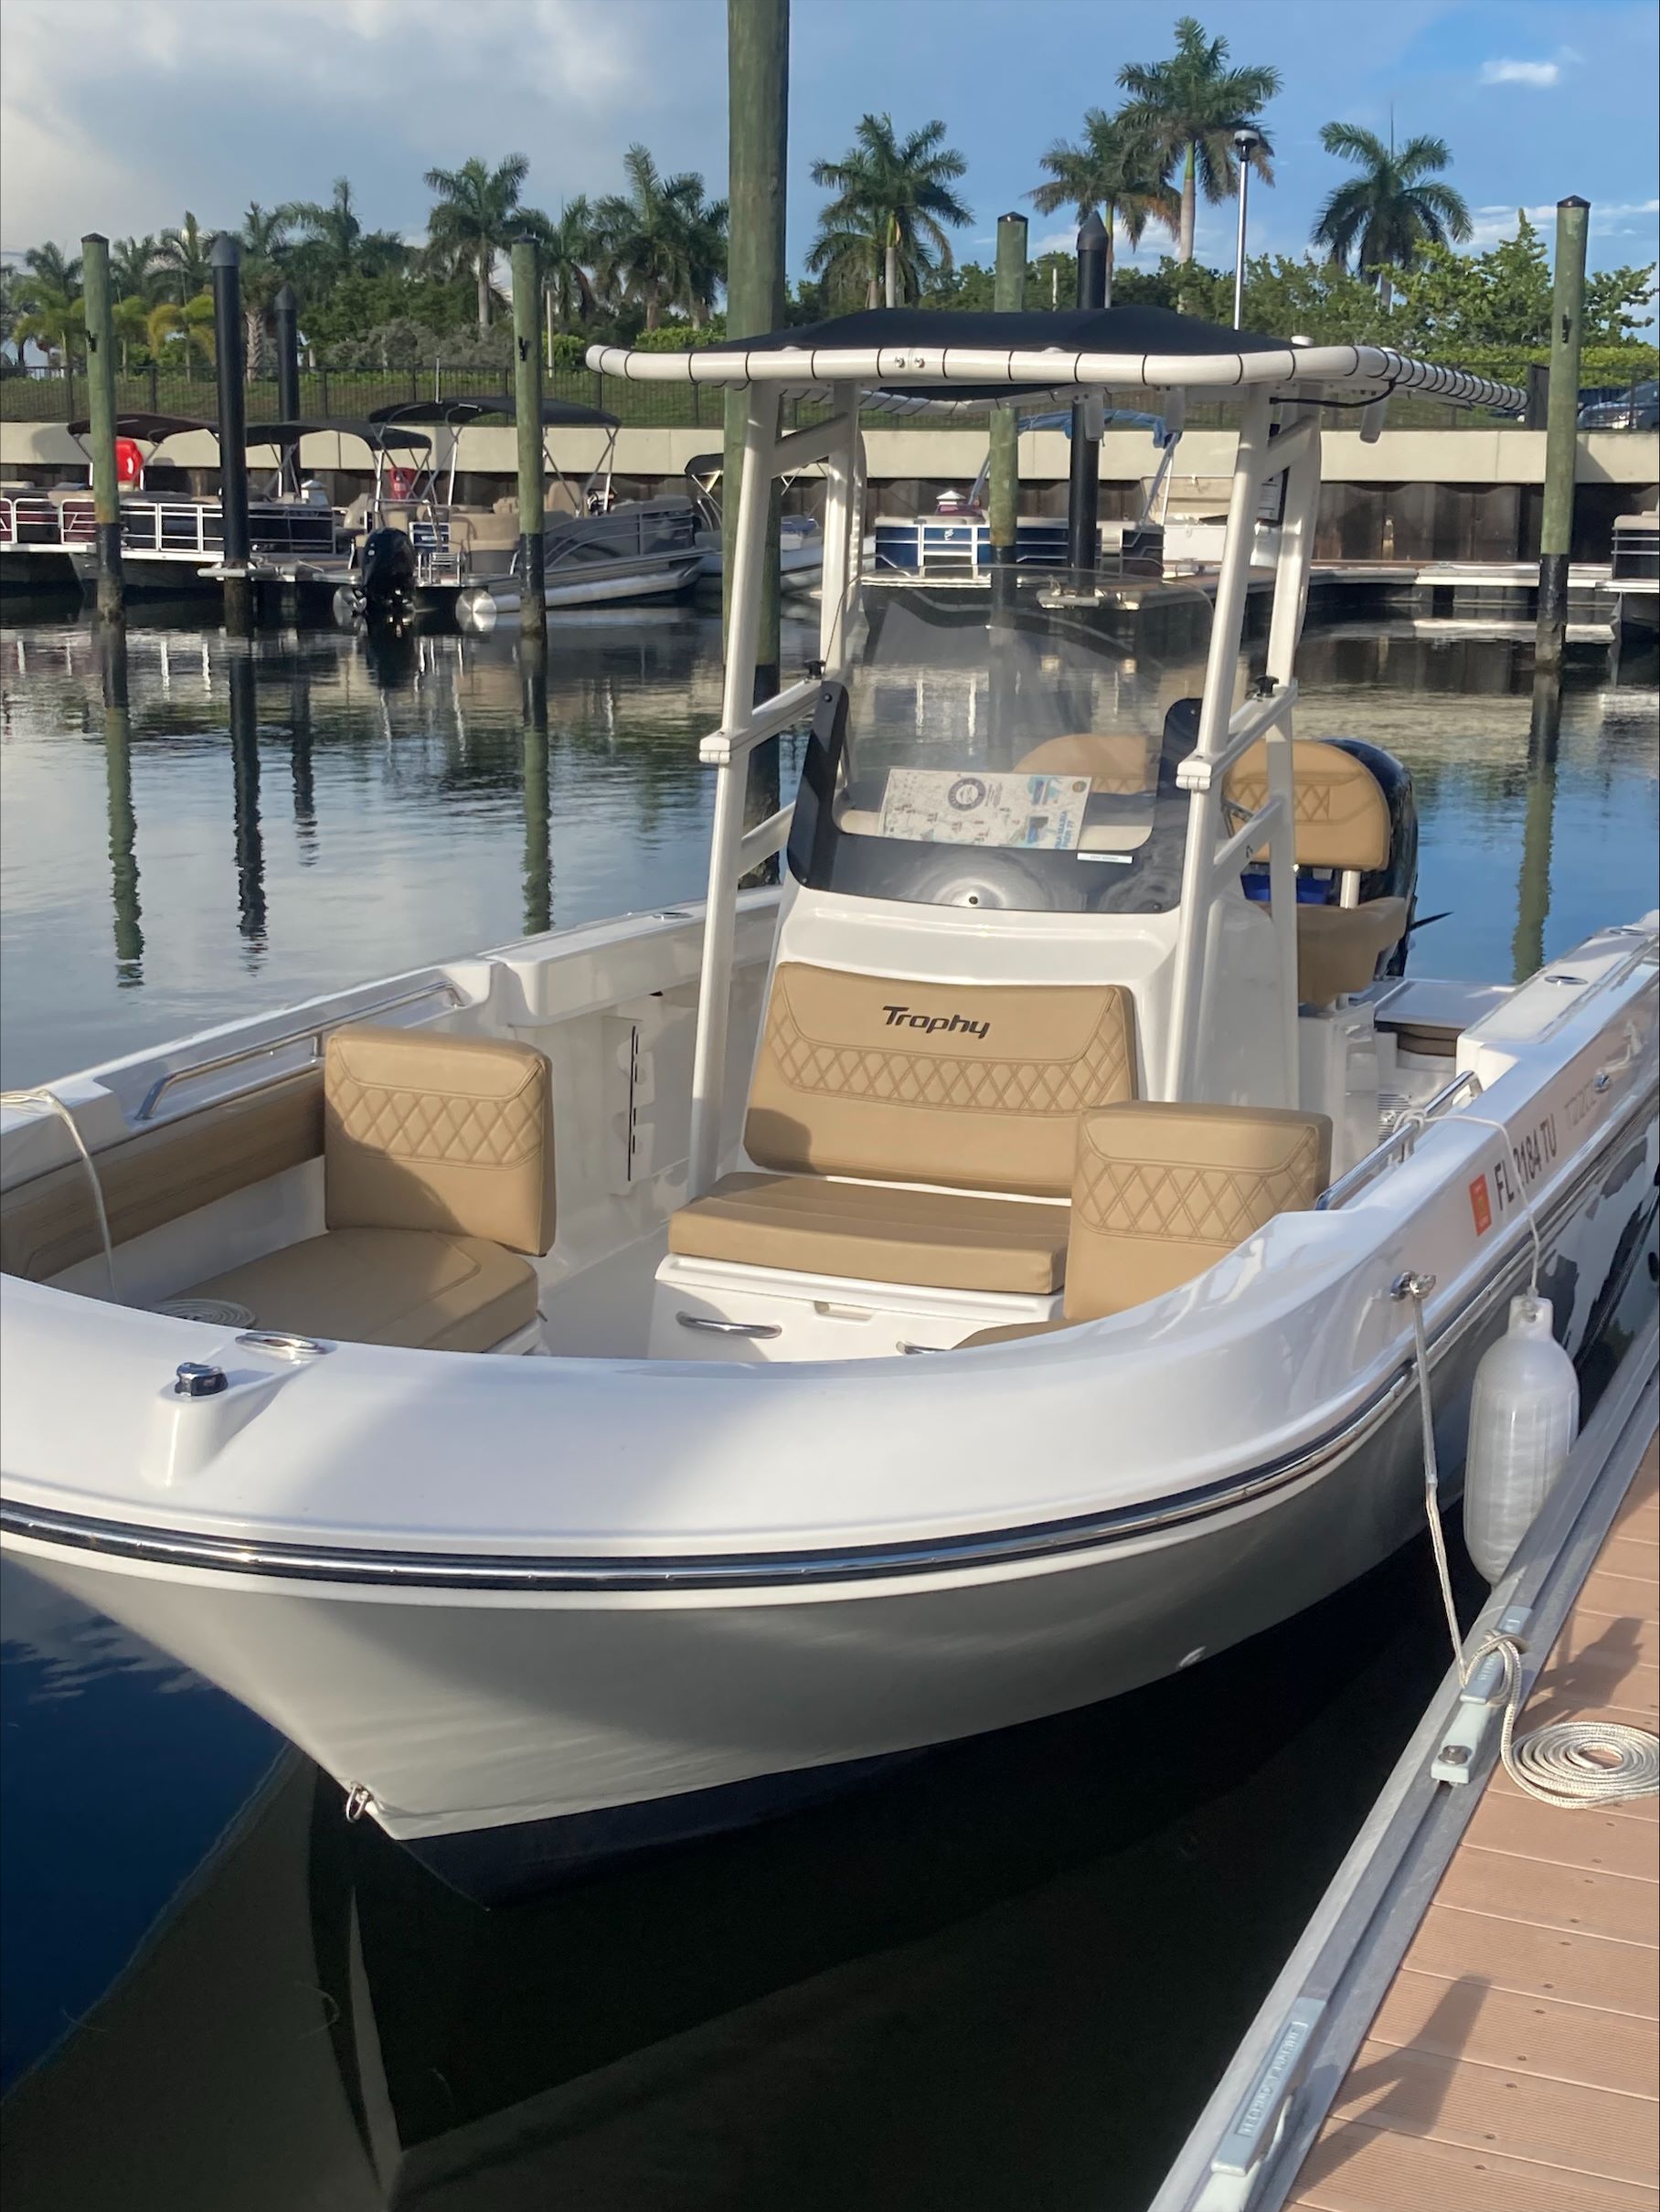 ANNA BANANA  (22FT Bayliner Trophy 22 Center Console - 150HP~Fishing Inshore)